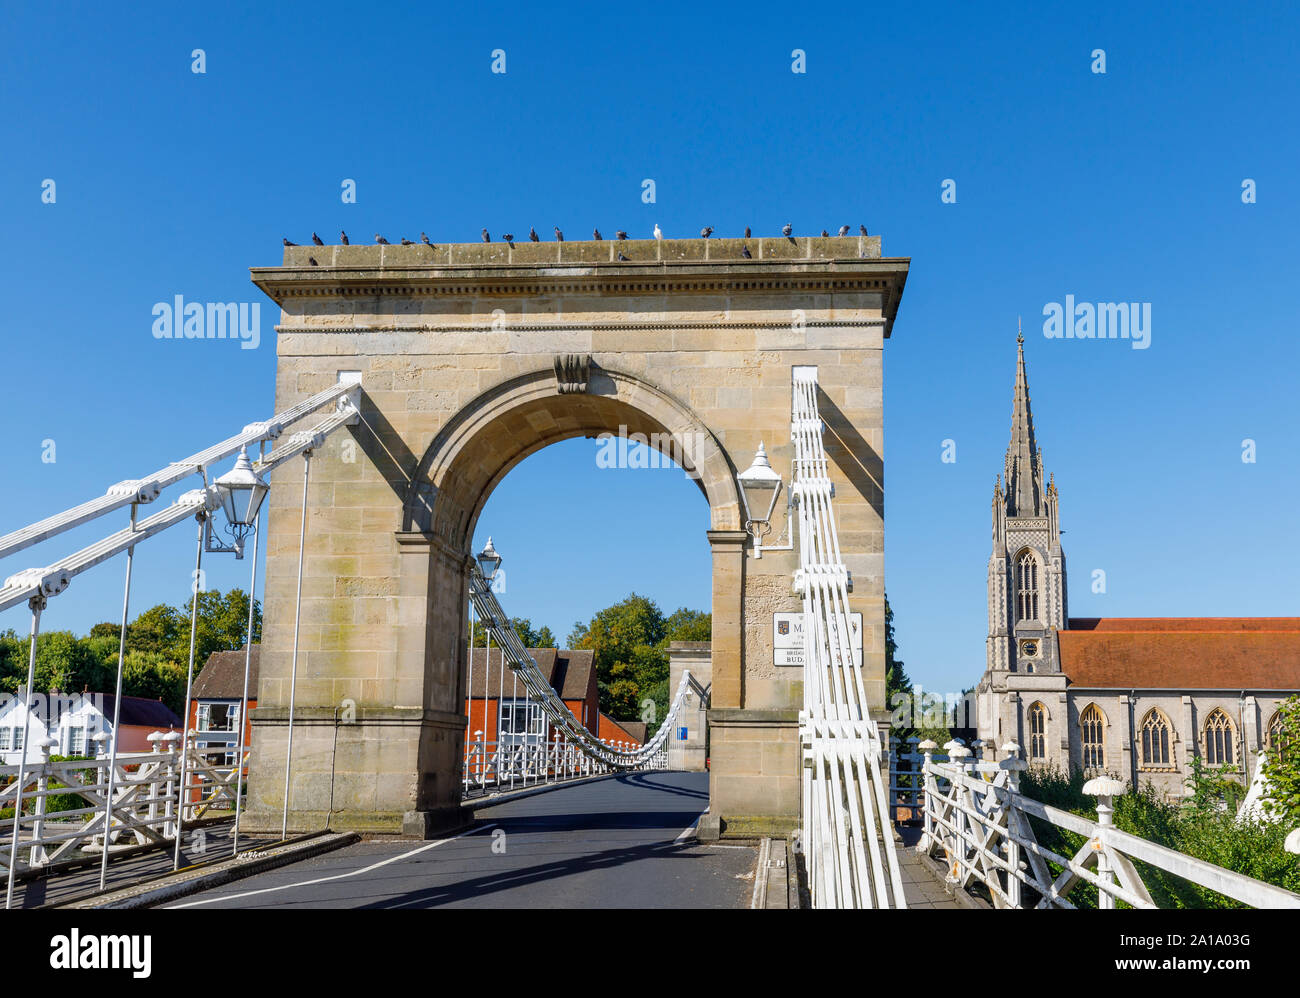 The southern tower entrance arch of Marlow suspension bridge over the River Thames, Marlow, Buckinghamshire, southeast England and All Saints Church Stock Photo